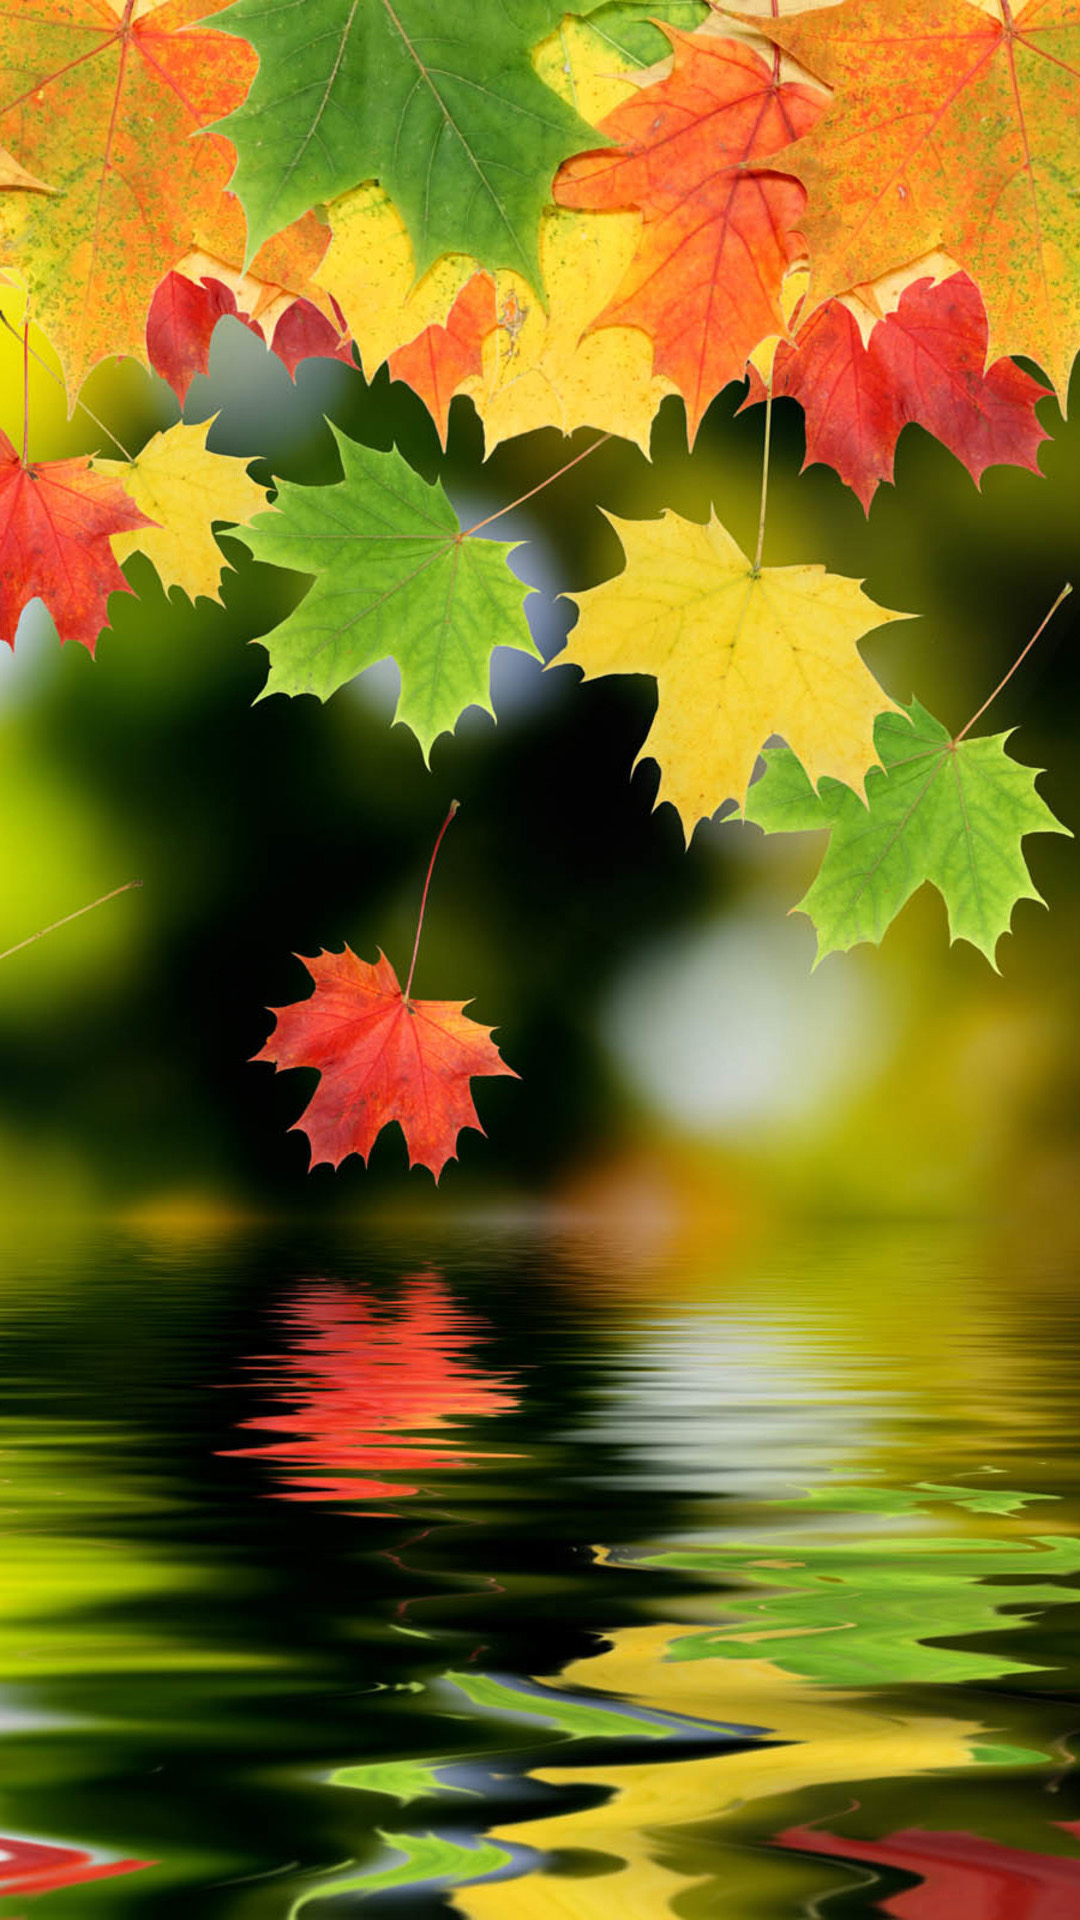 Autumn Maple Leafs Android Wallpaper free download